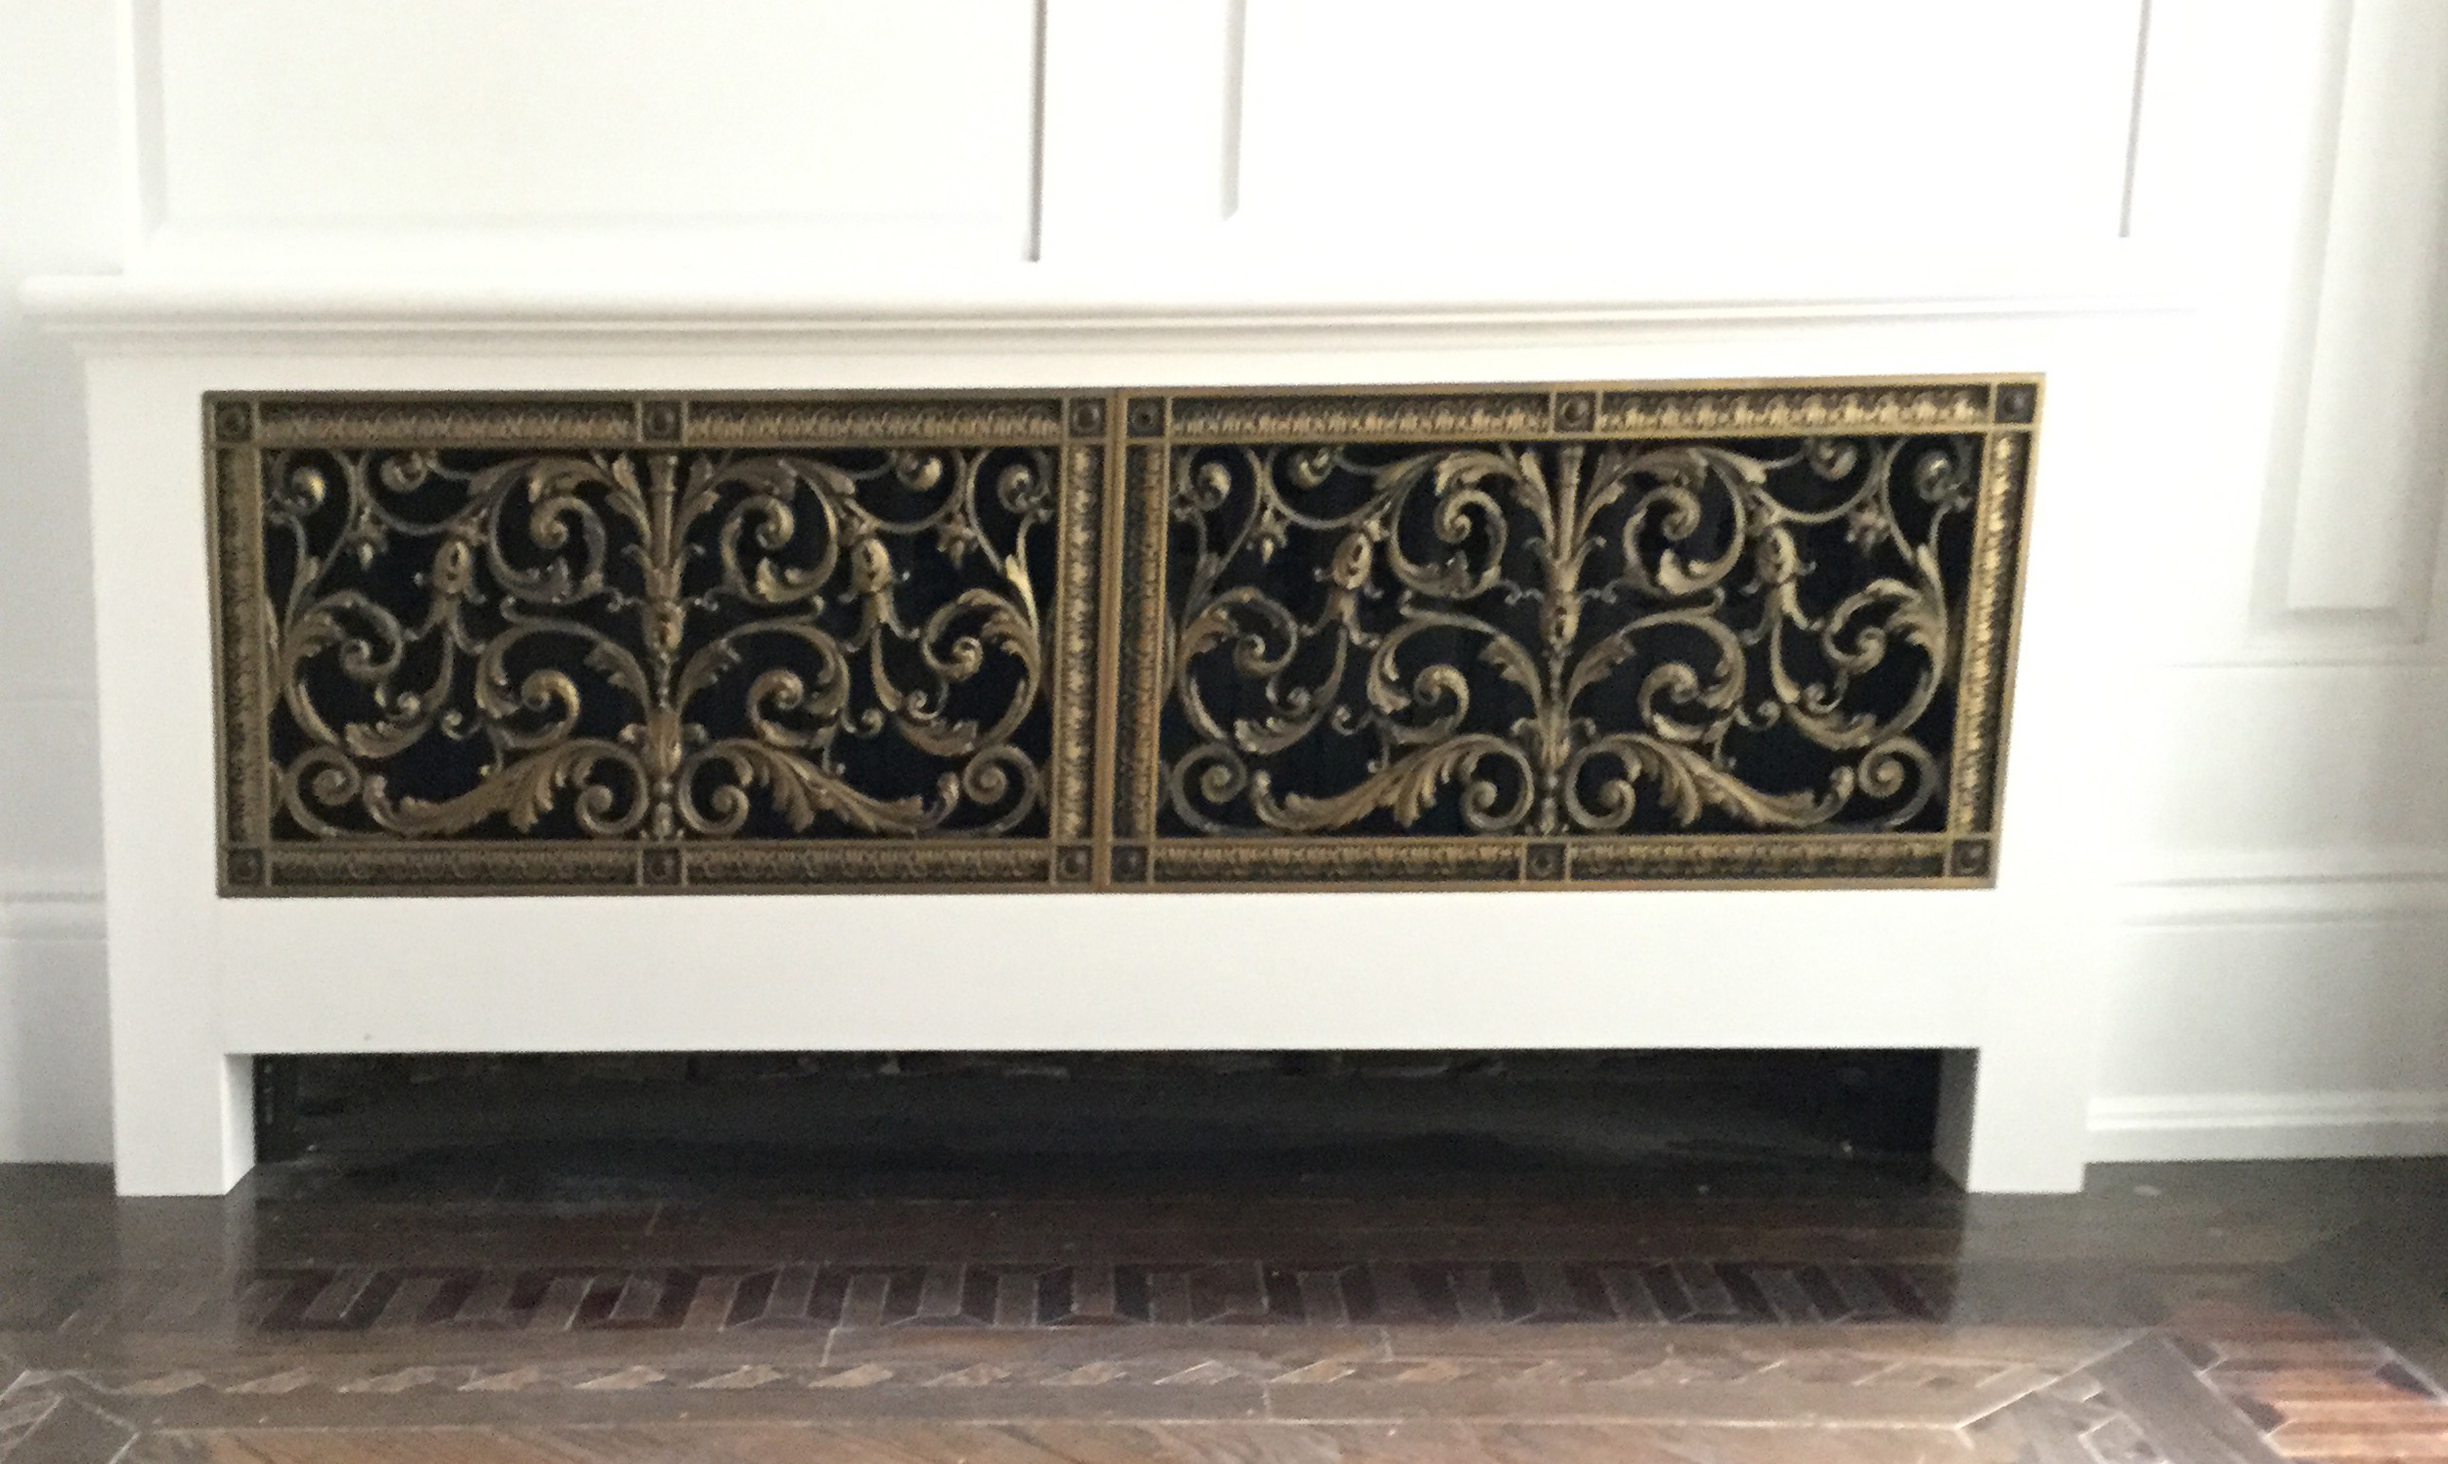 Radiator cover with two Louis XIV Style Grilles installed flush.